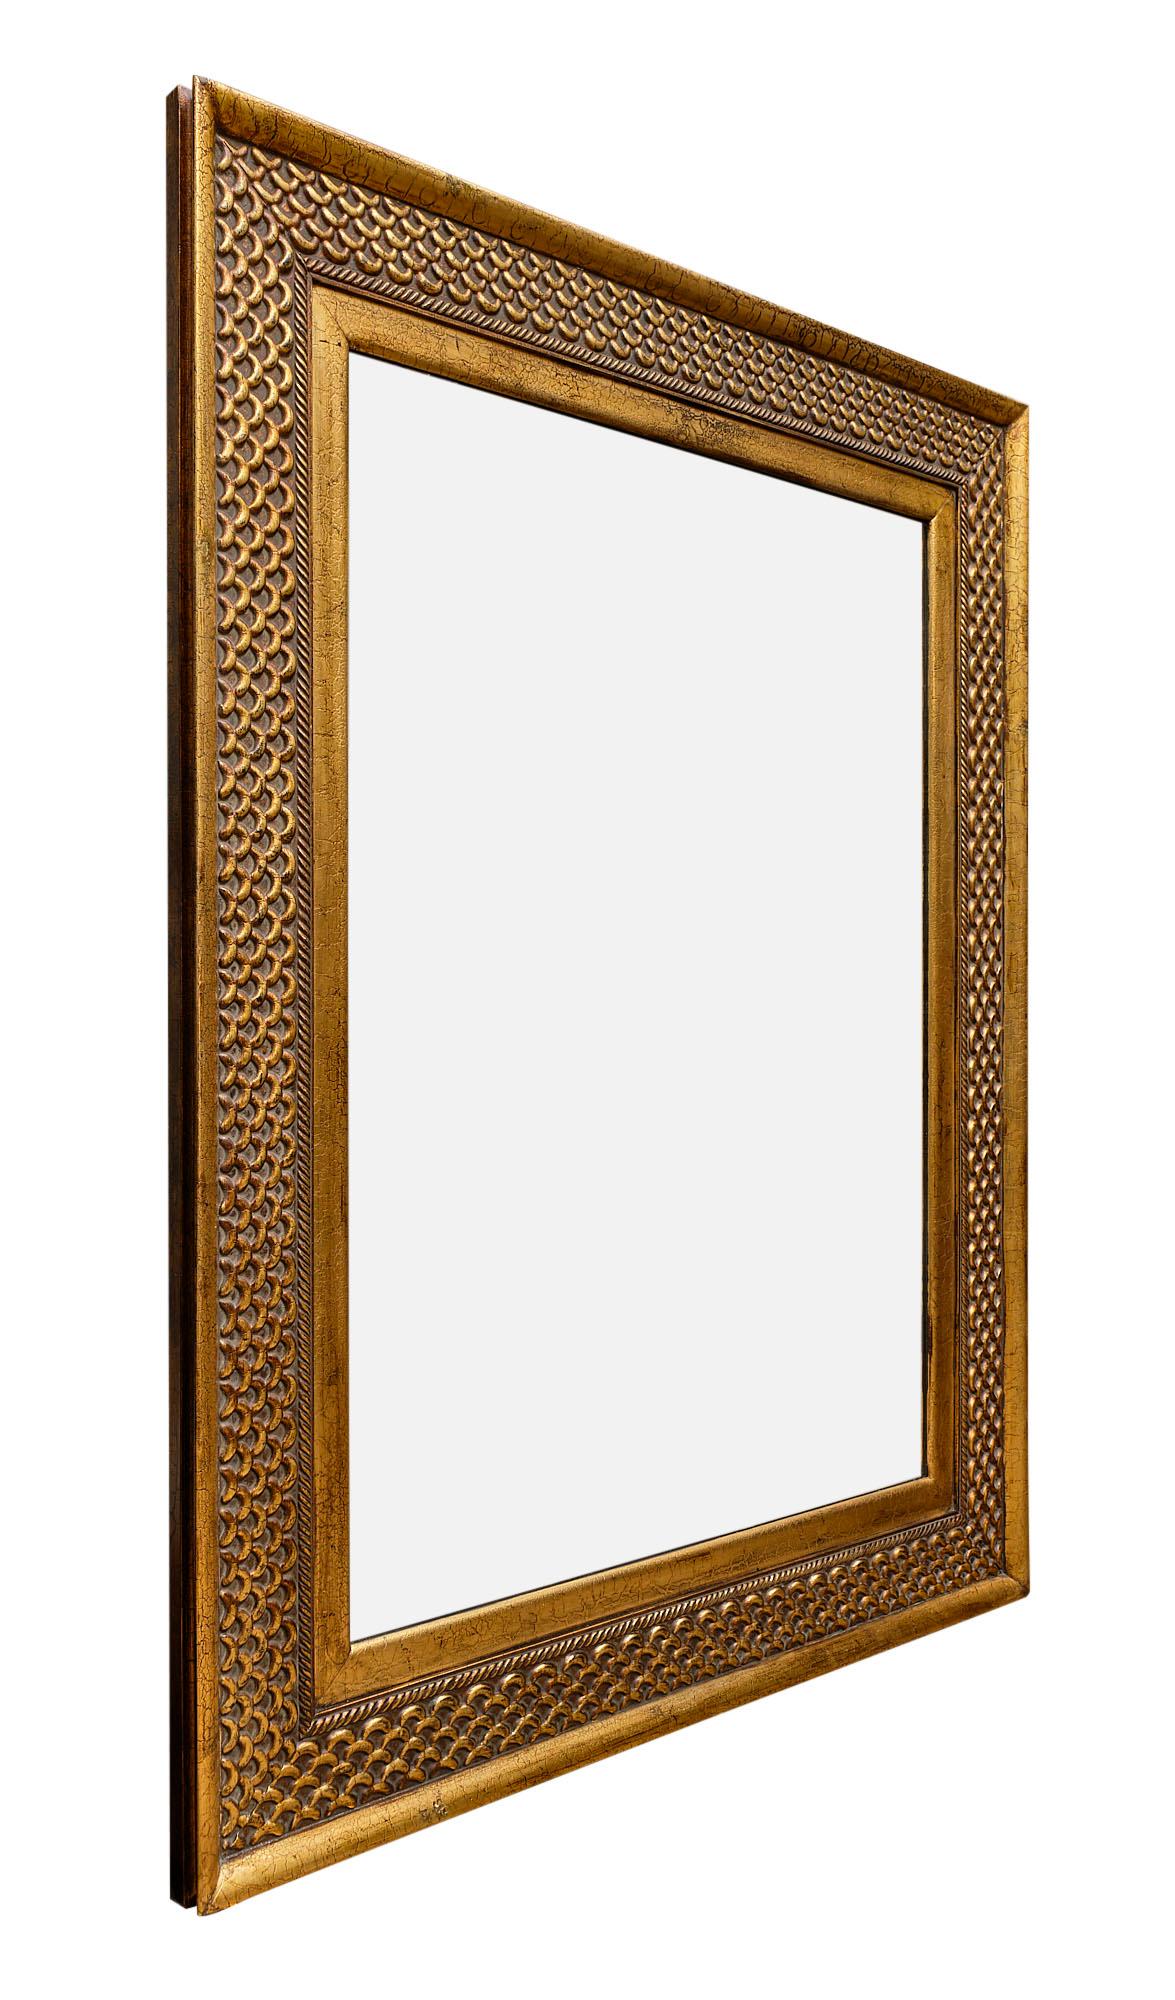 Grand Art Deco style mirror from France made of hand-carved wood with gold leafing. We love the impressive size of this piece!